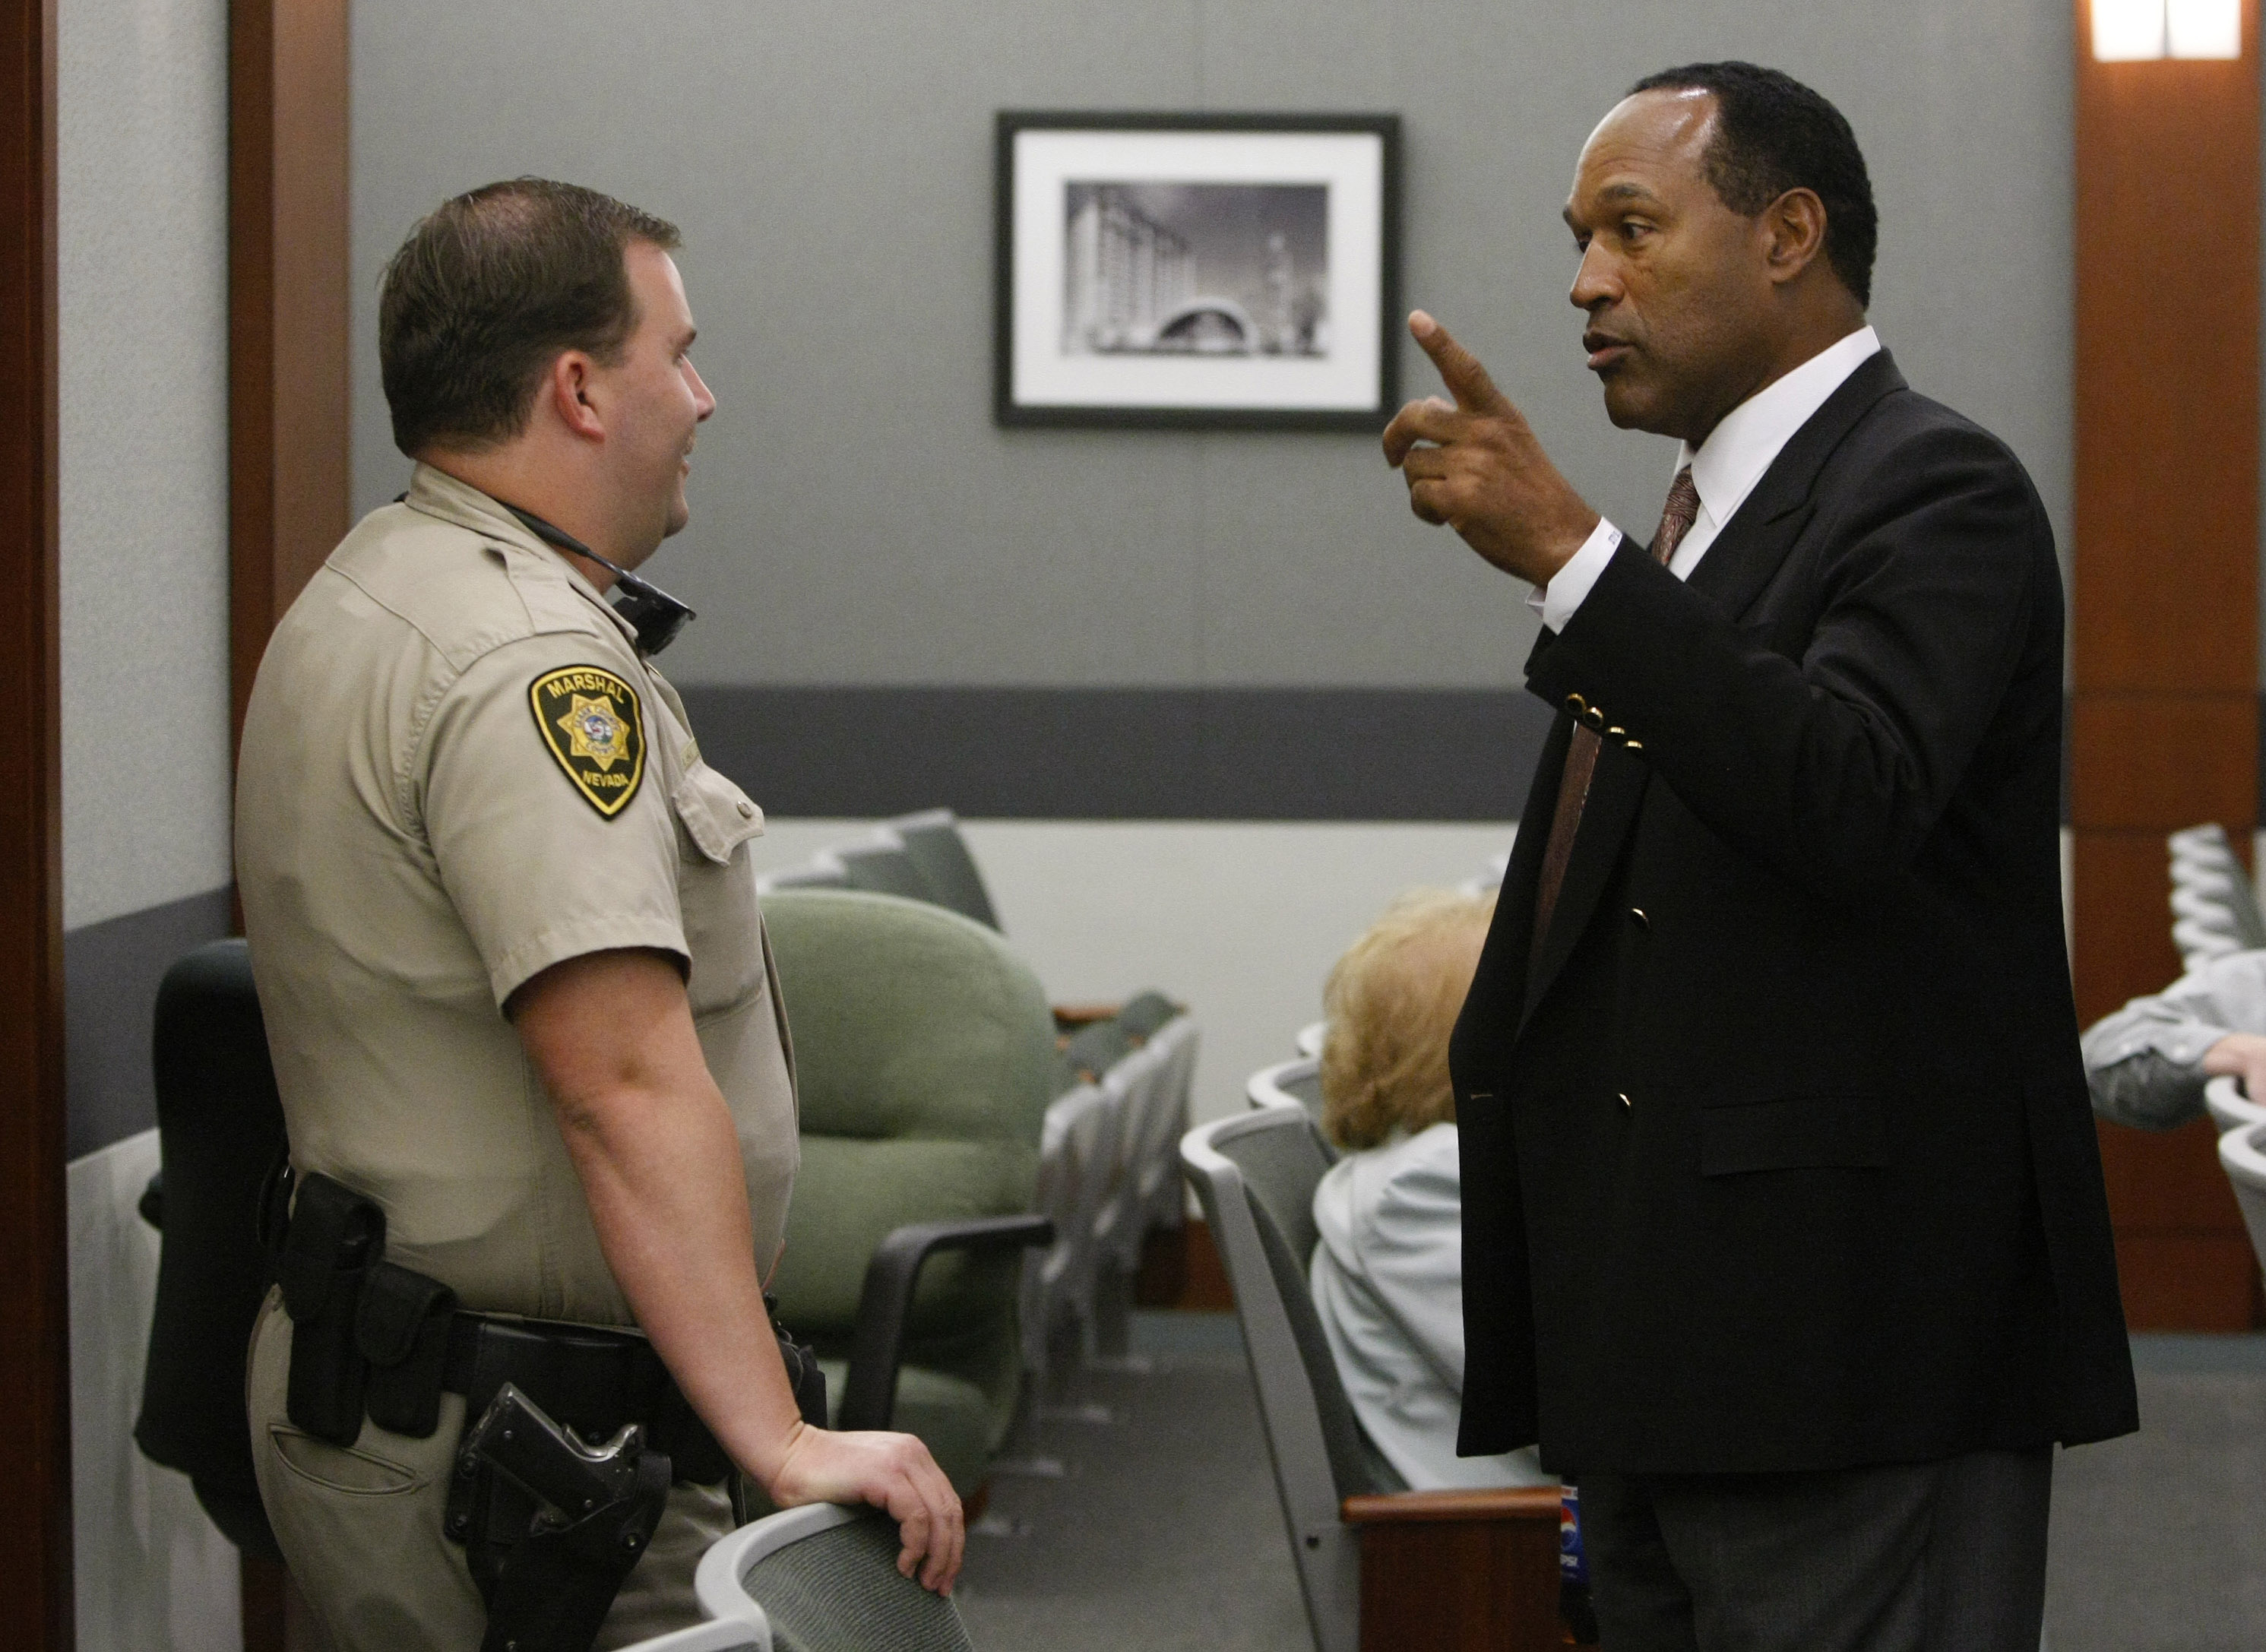 O.J. Simpson talks with deputy marshal Doug Hale after the second day of jury selection for Simpson's trial at the Clark County Regional Justice Center in Las Vegas